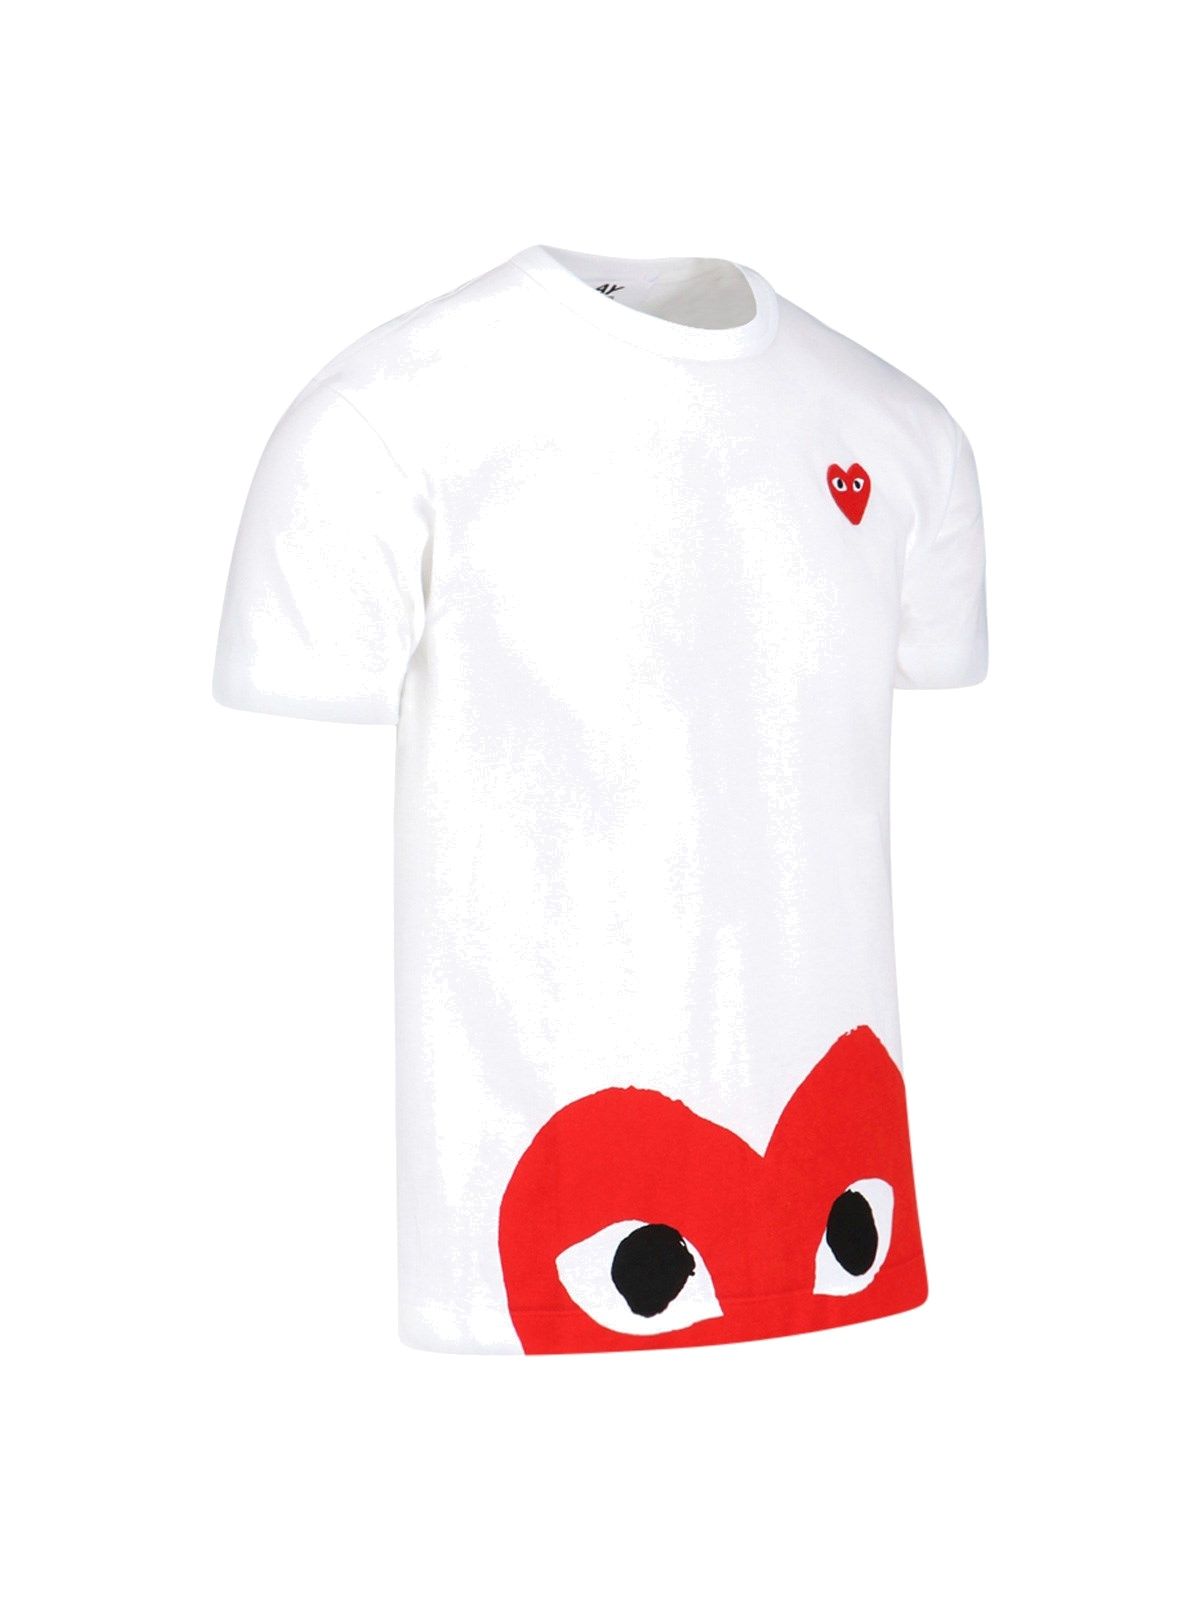 T-shirt stampa cuore